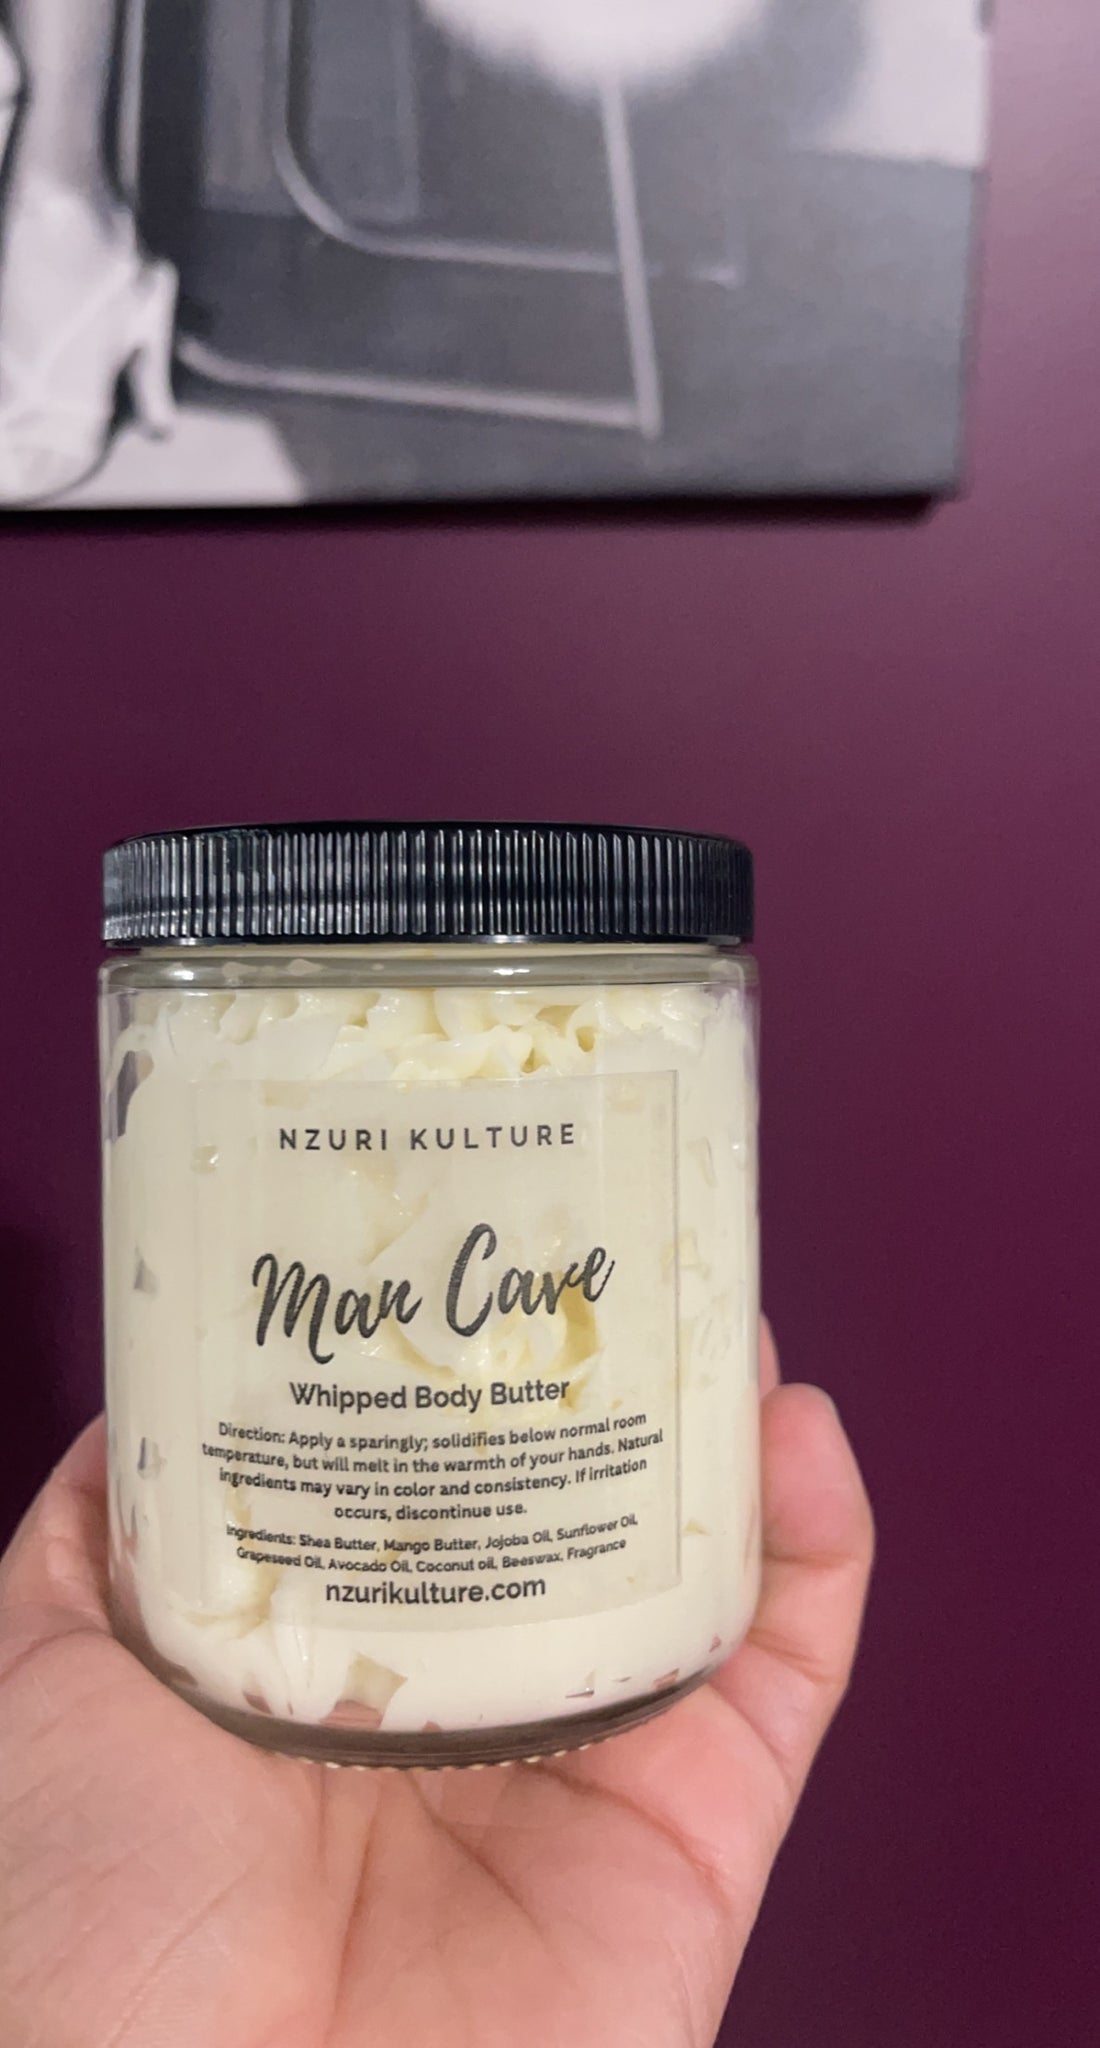 Man Cave Whipped Body Butter